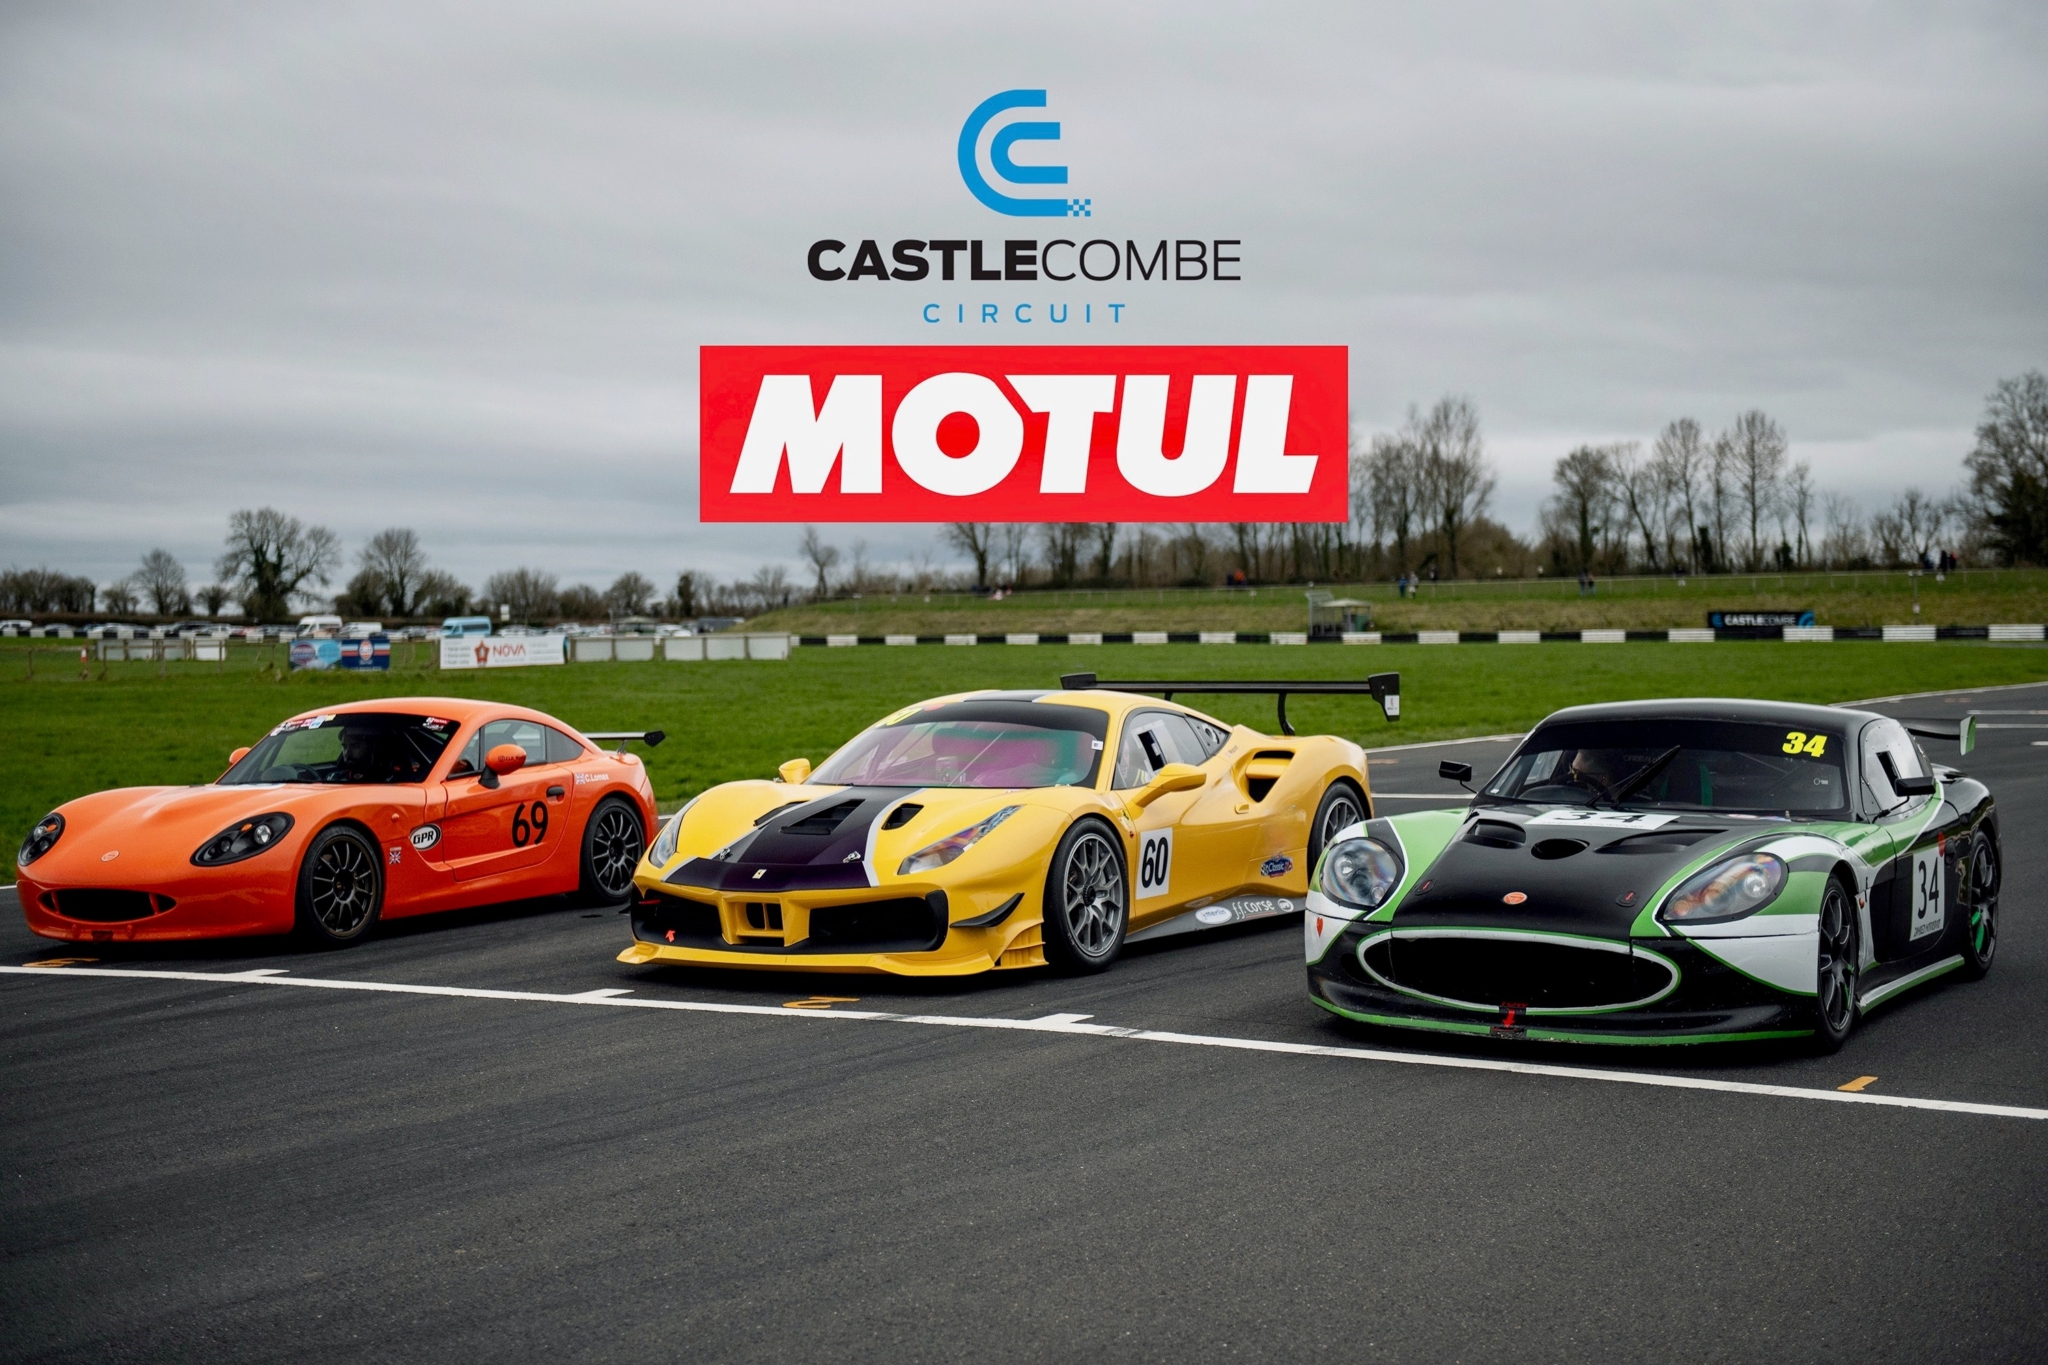 Motul joins Castle Combe Circuit as a circuit partner, event sponsor for 2024